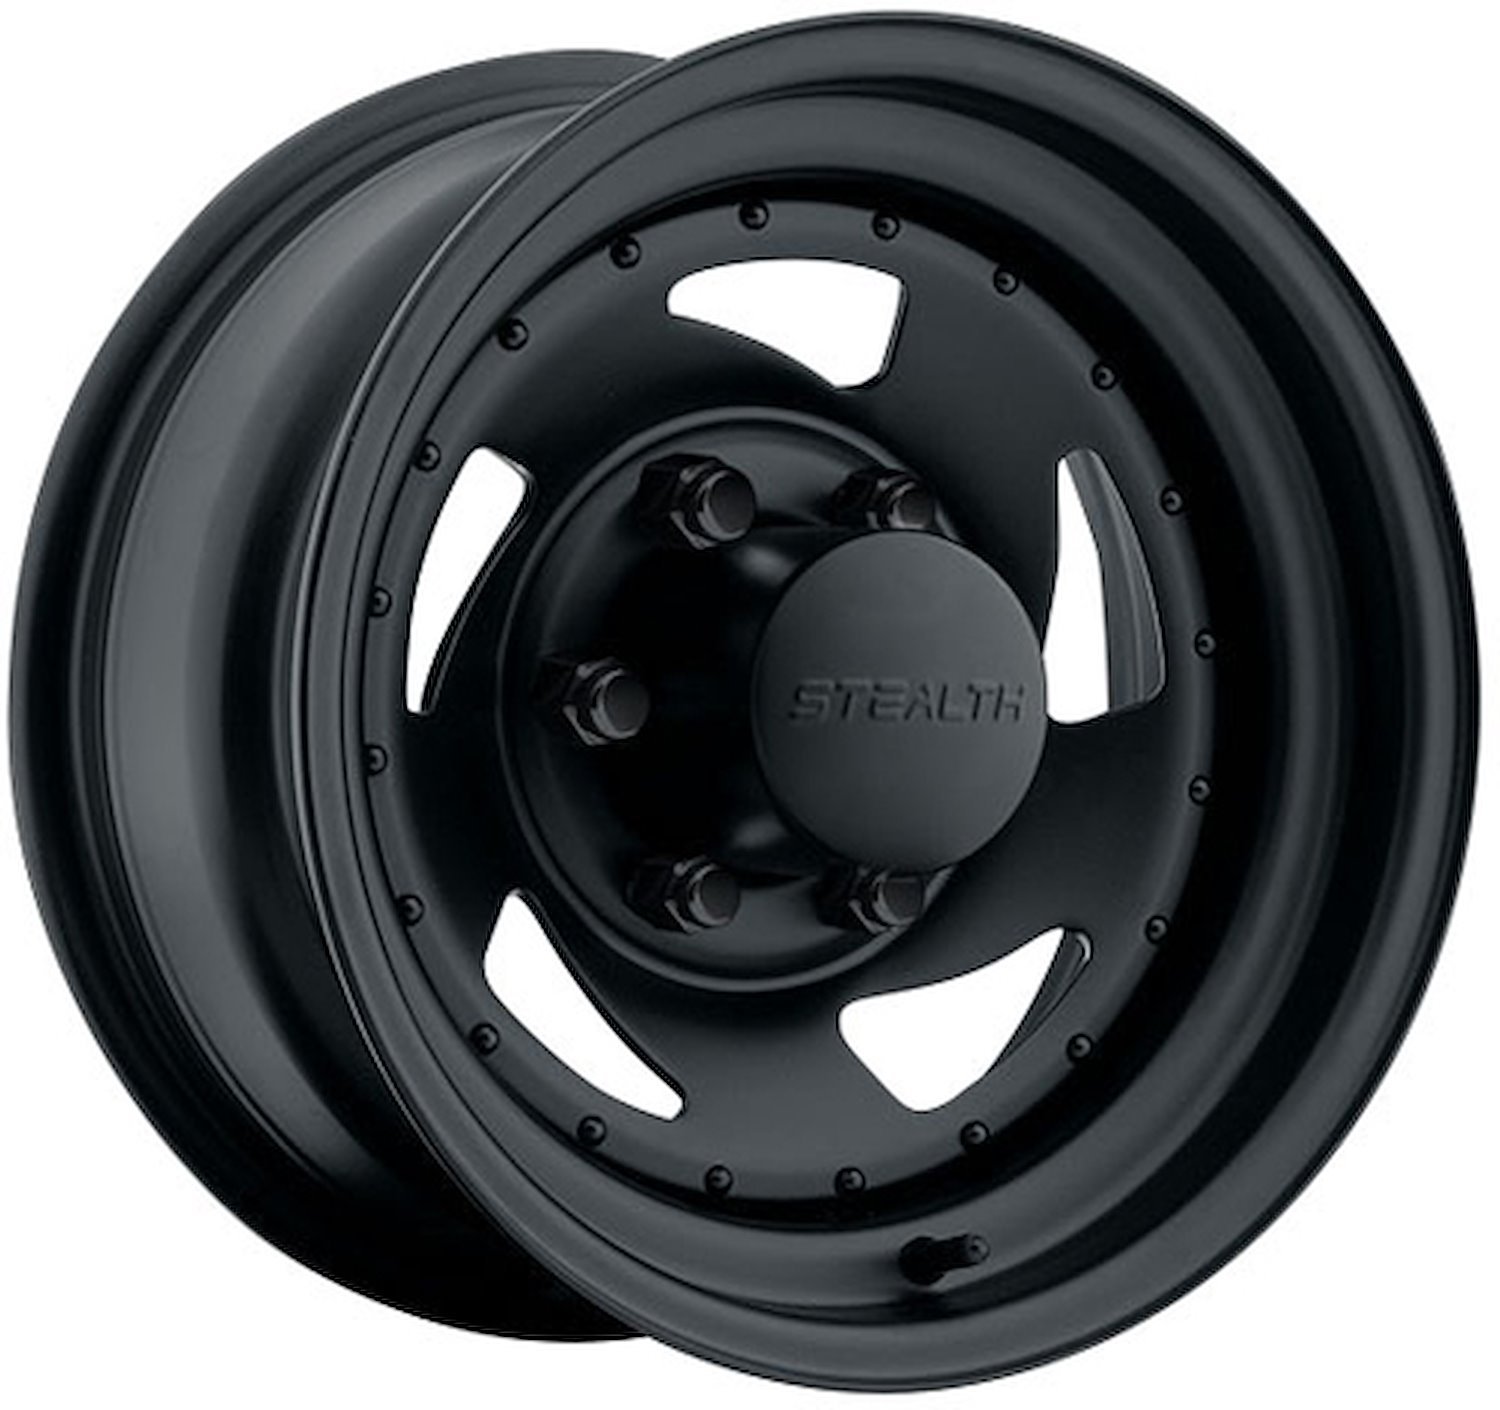 STEALTH BLACK BLADE 15 x 12 5 x 55 Bolt Circle 4 Back Spacing 63 offset 428 Center Bore 1400 lbs Load Rating